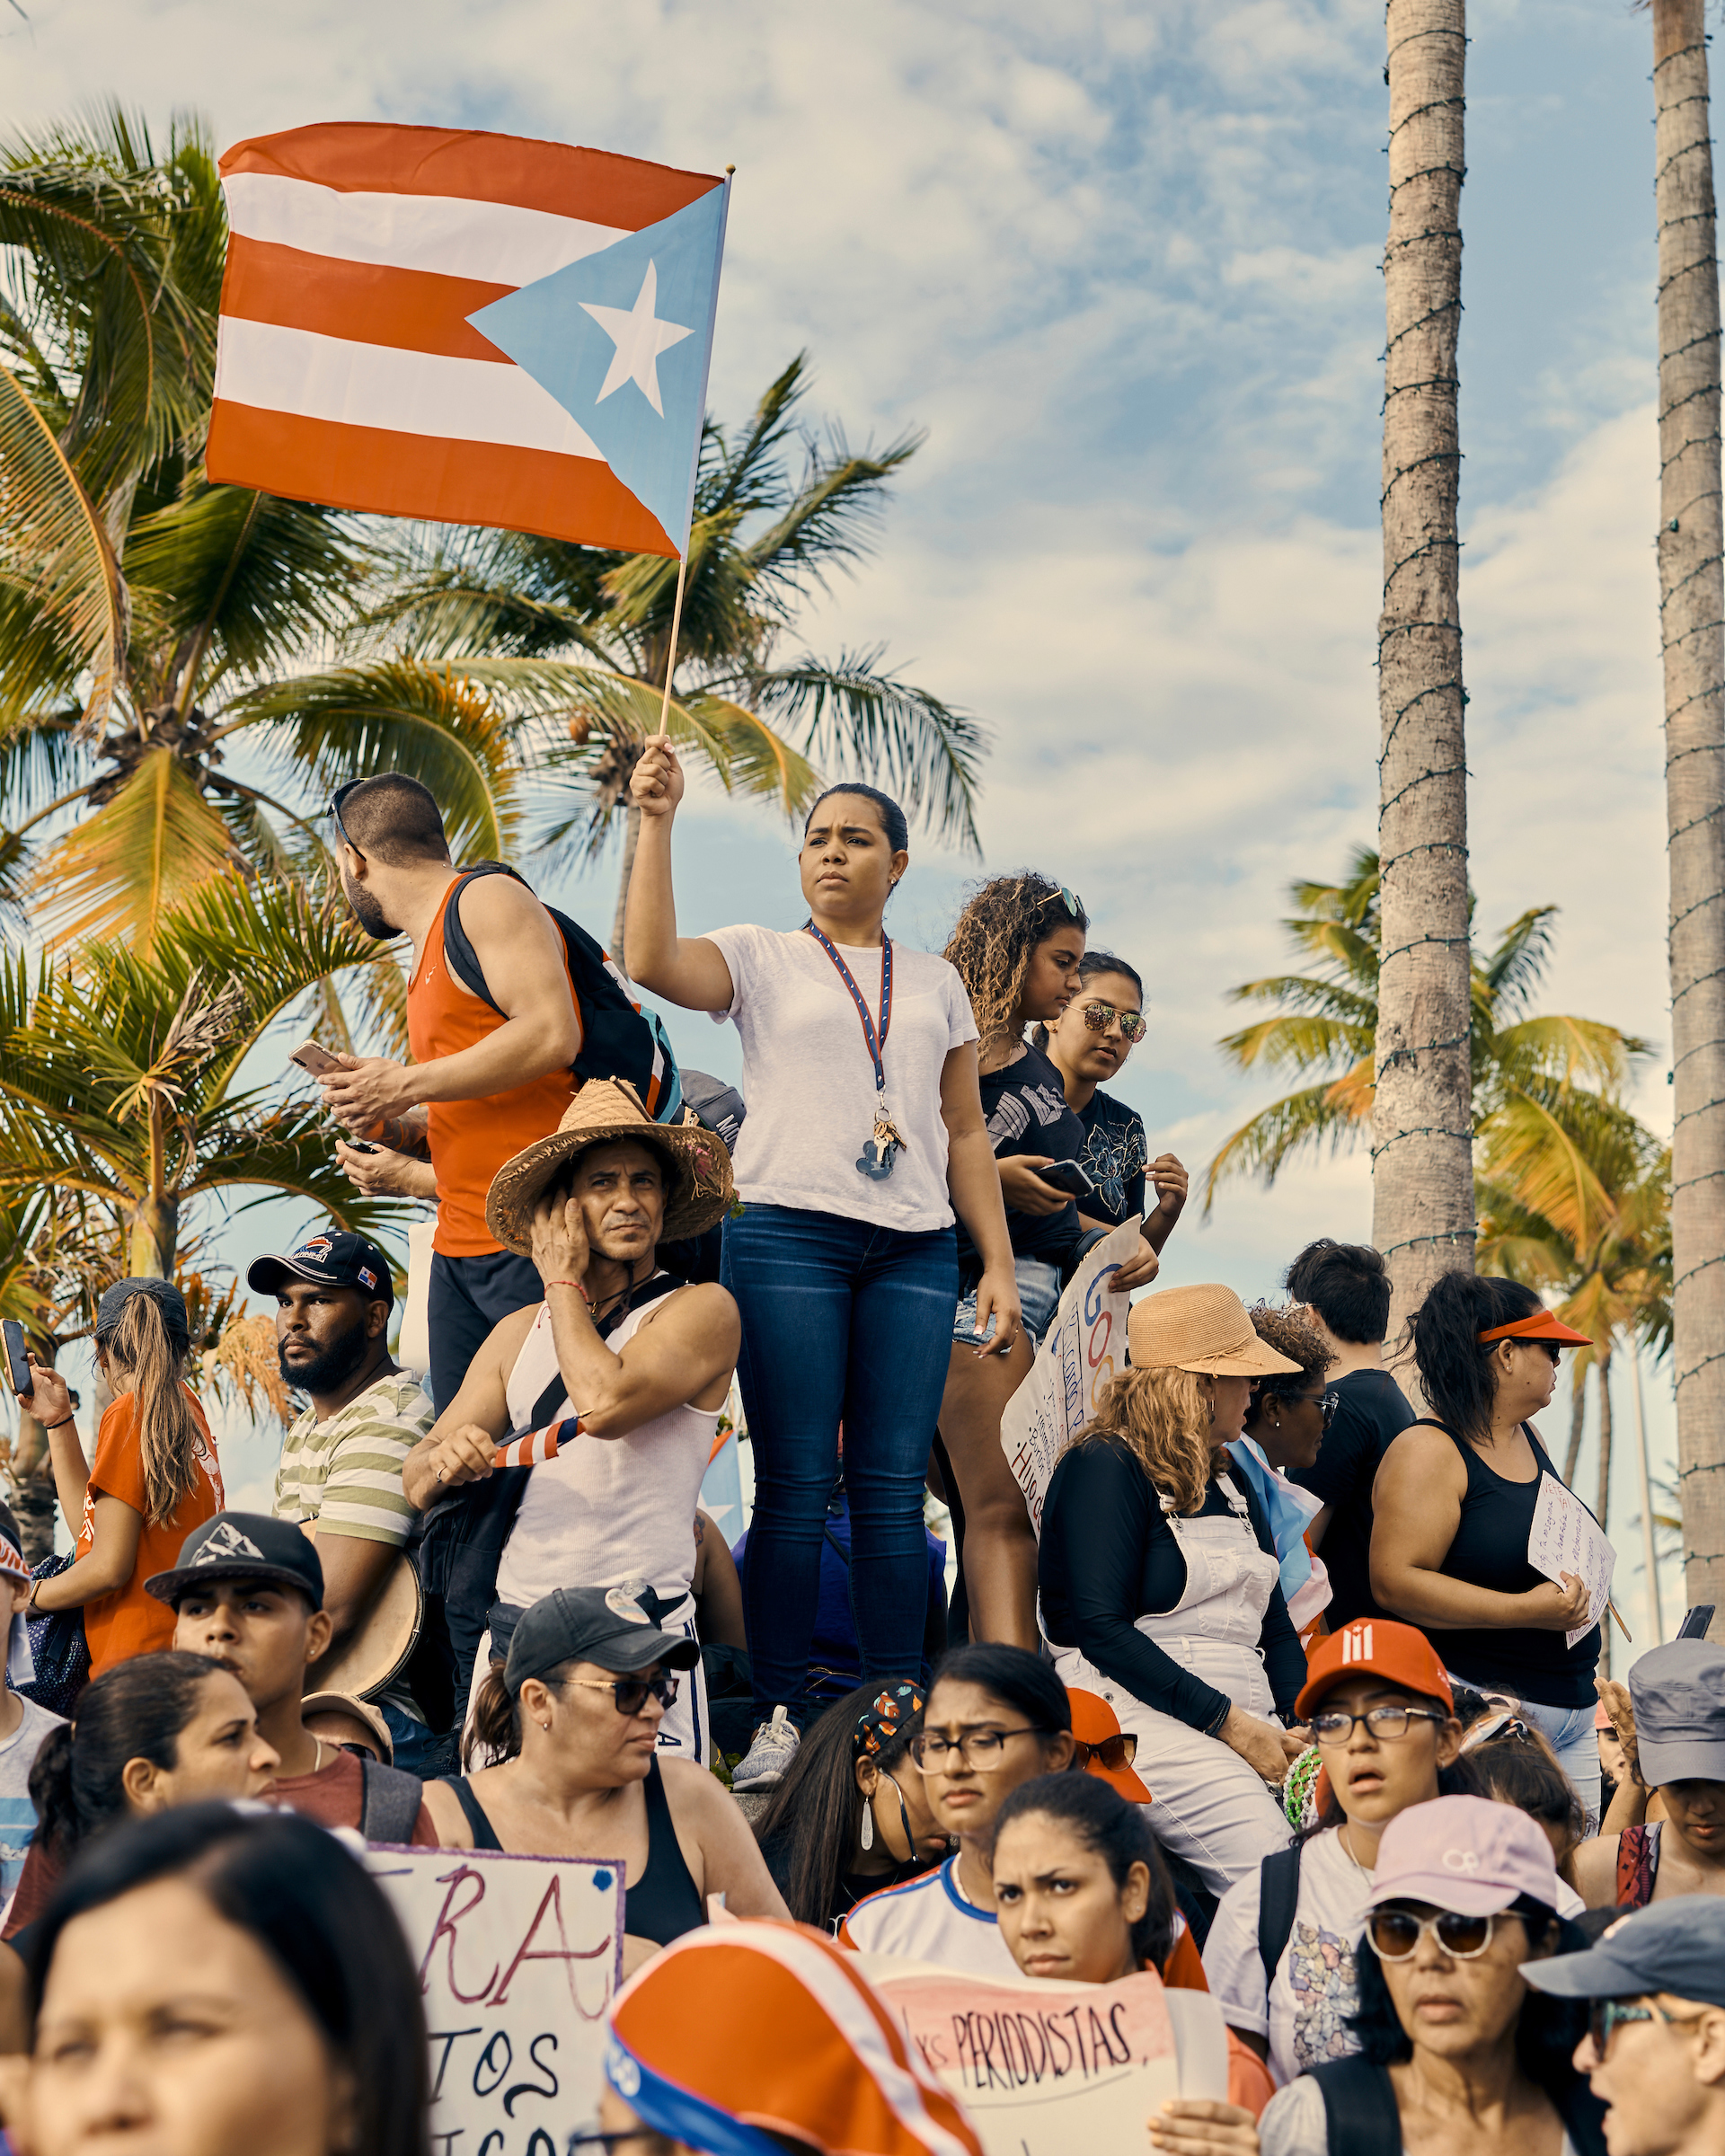 A woman waves a Puerto Rican flag at the anti-Rosselló protest in San Juan, Puerto Rico, on July 17, 2019. (Christopher Gregory for TIME)